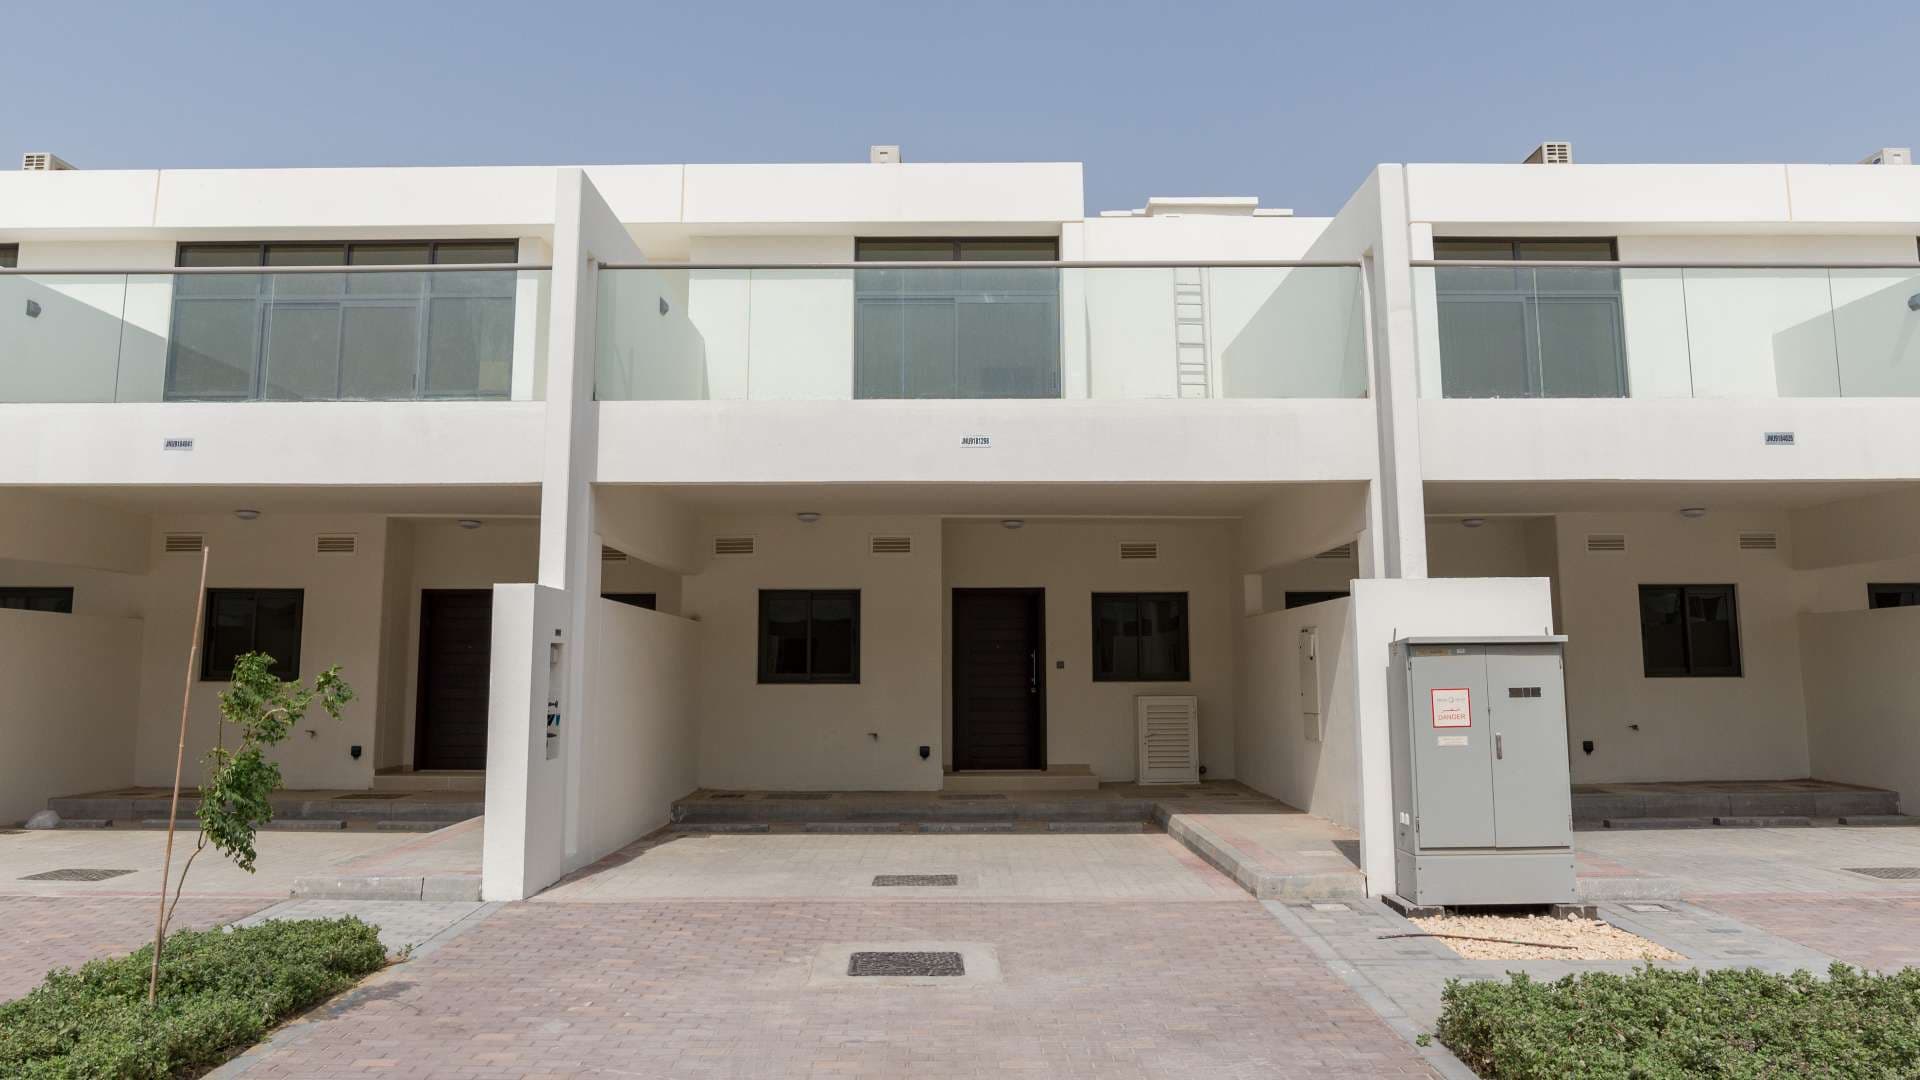 2 Bedroom Townhouse For Rent Janusia Lp08383 1e28cdef6067be00.jpg